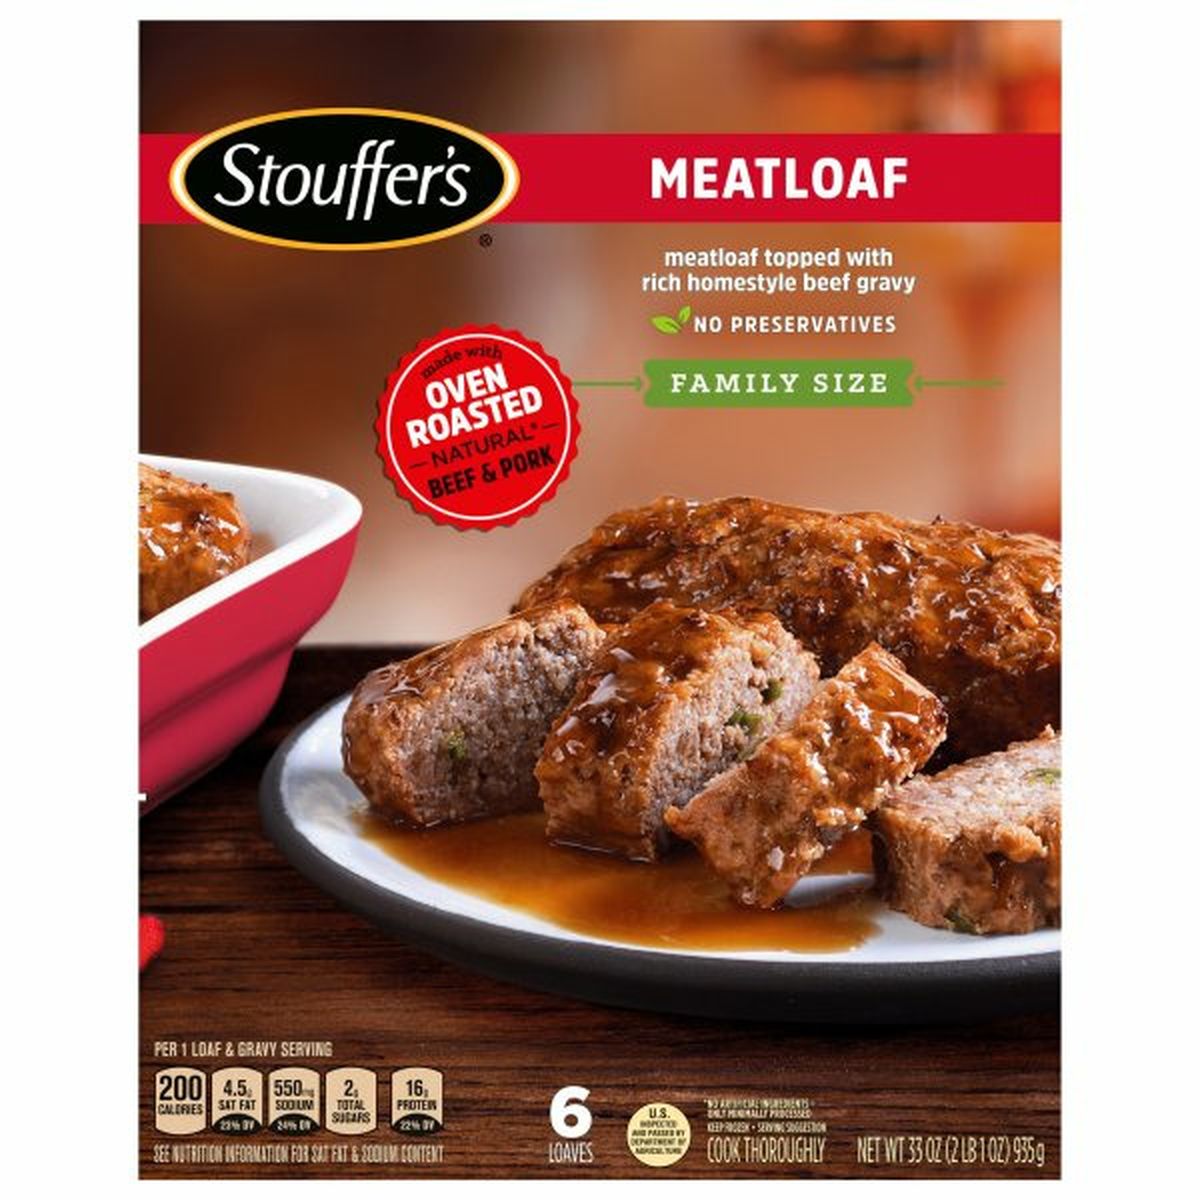 Calories in Stouffer's Meatloaf, Family Size